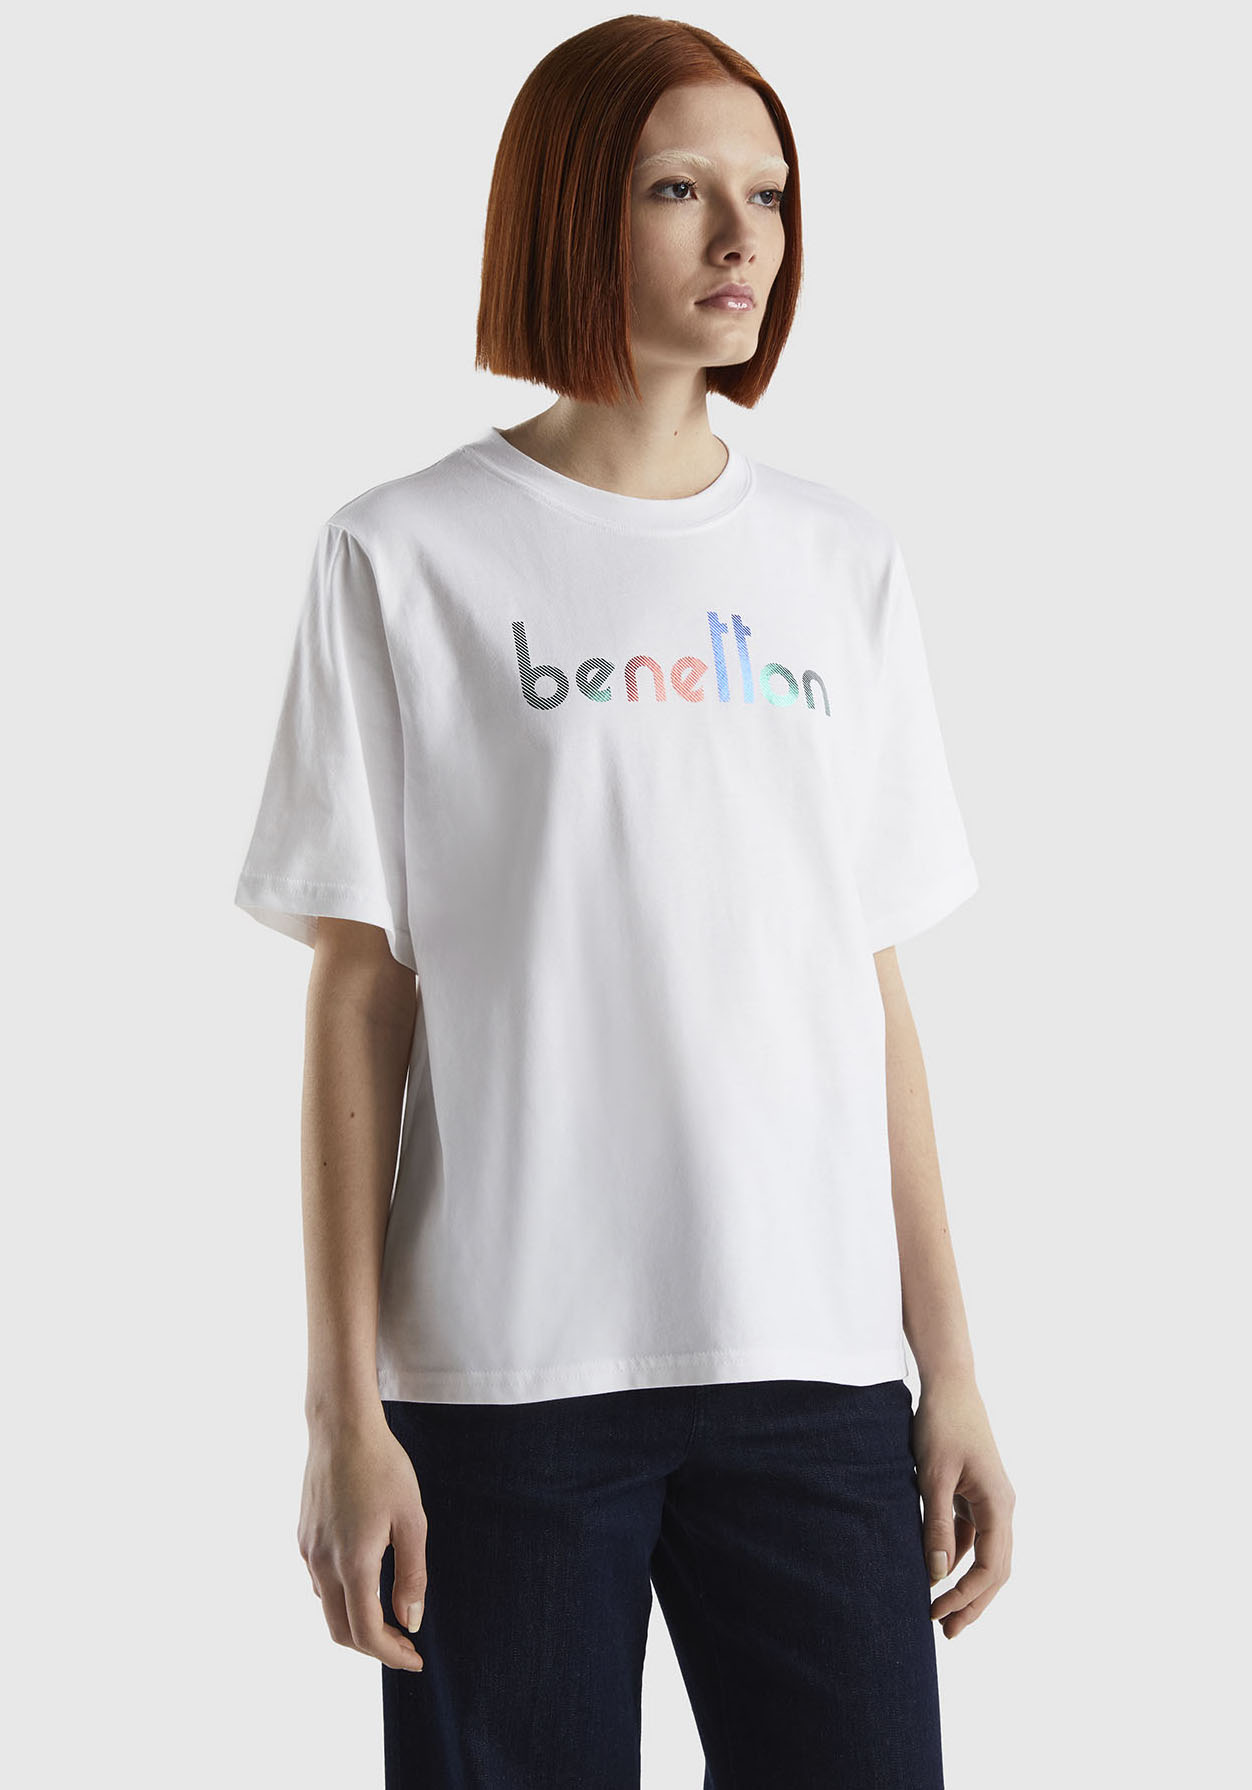 United Colors of Benetton T-Shirt, mit Logodruck auf der Brust von United Colors of Benetton